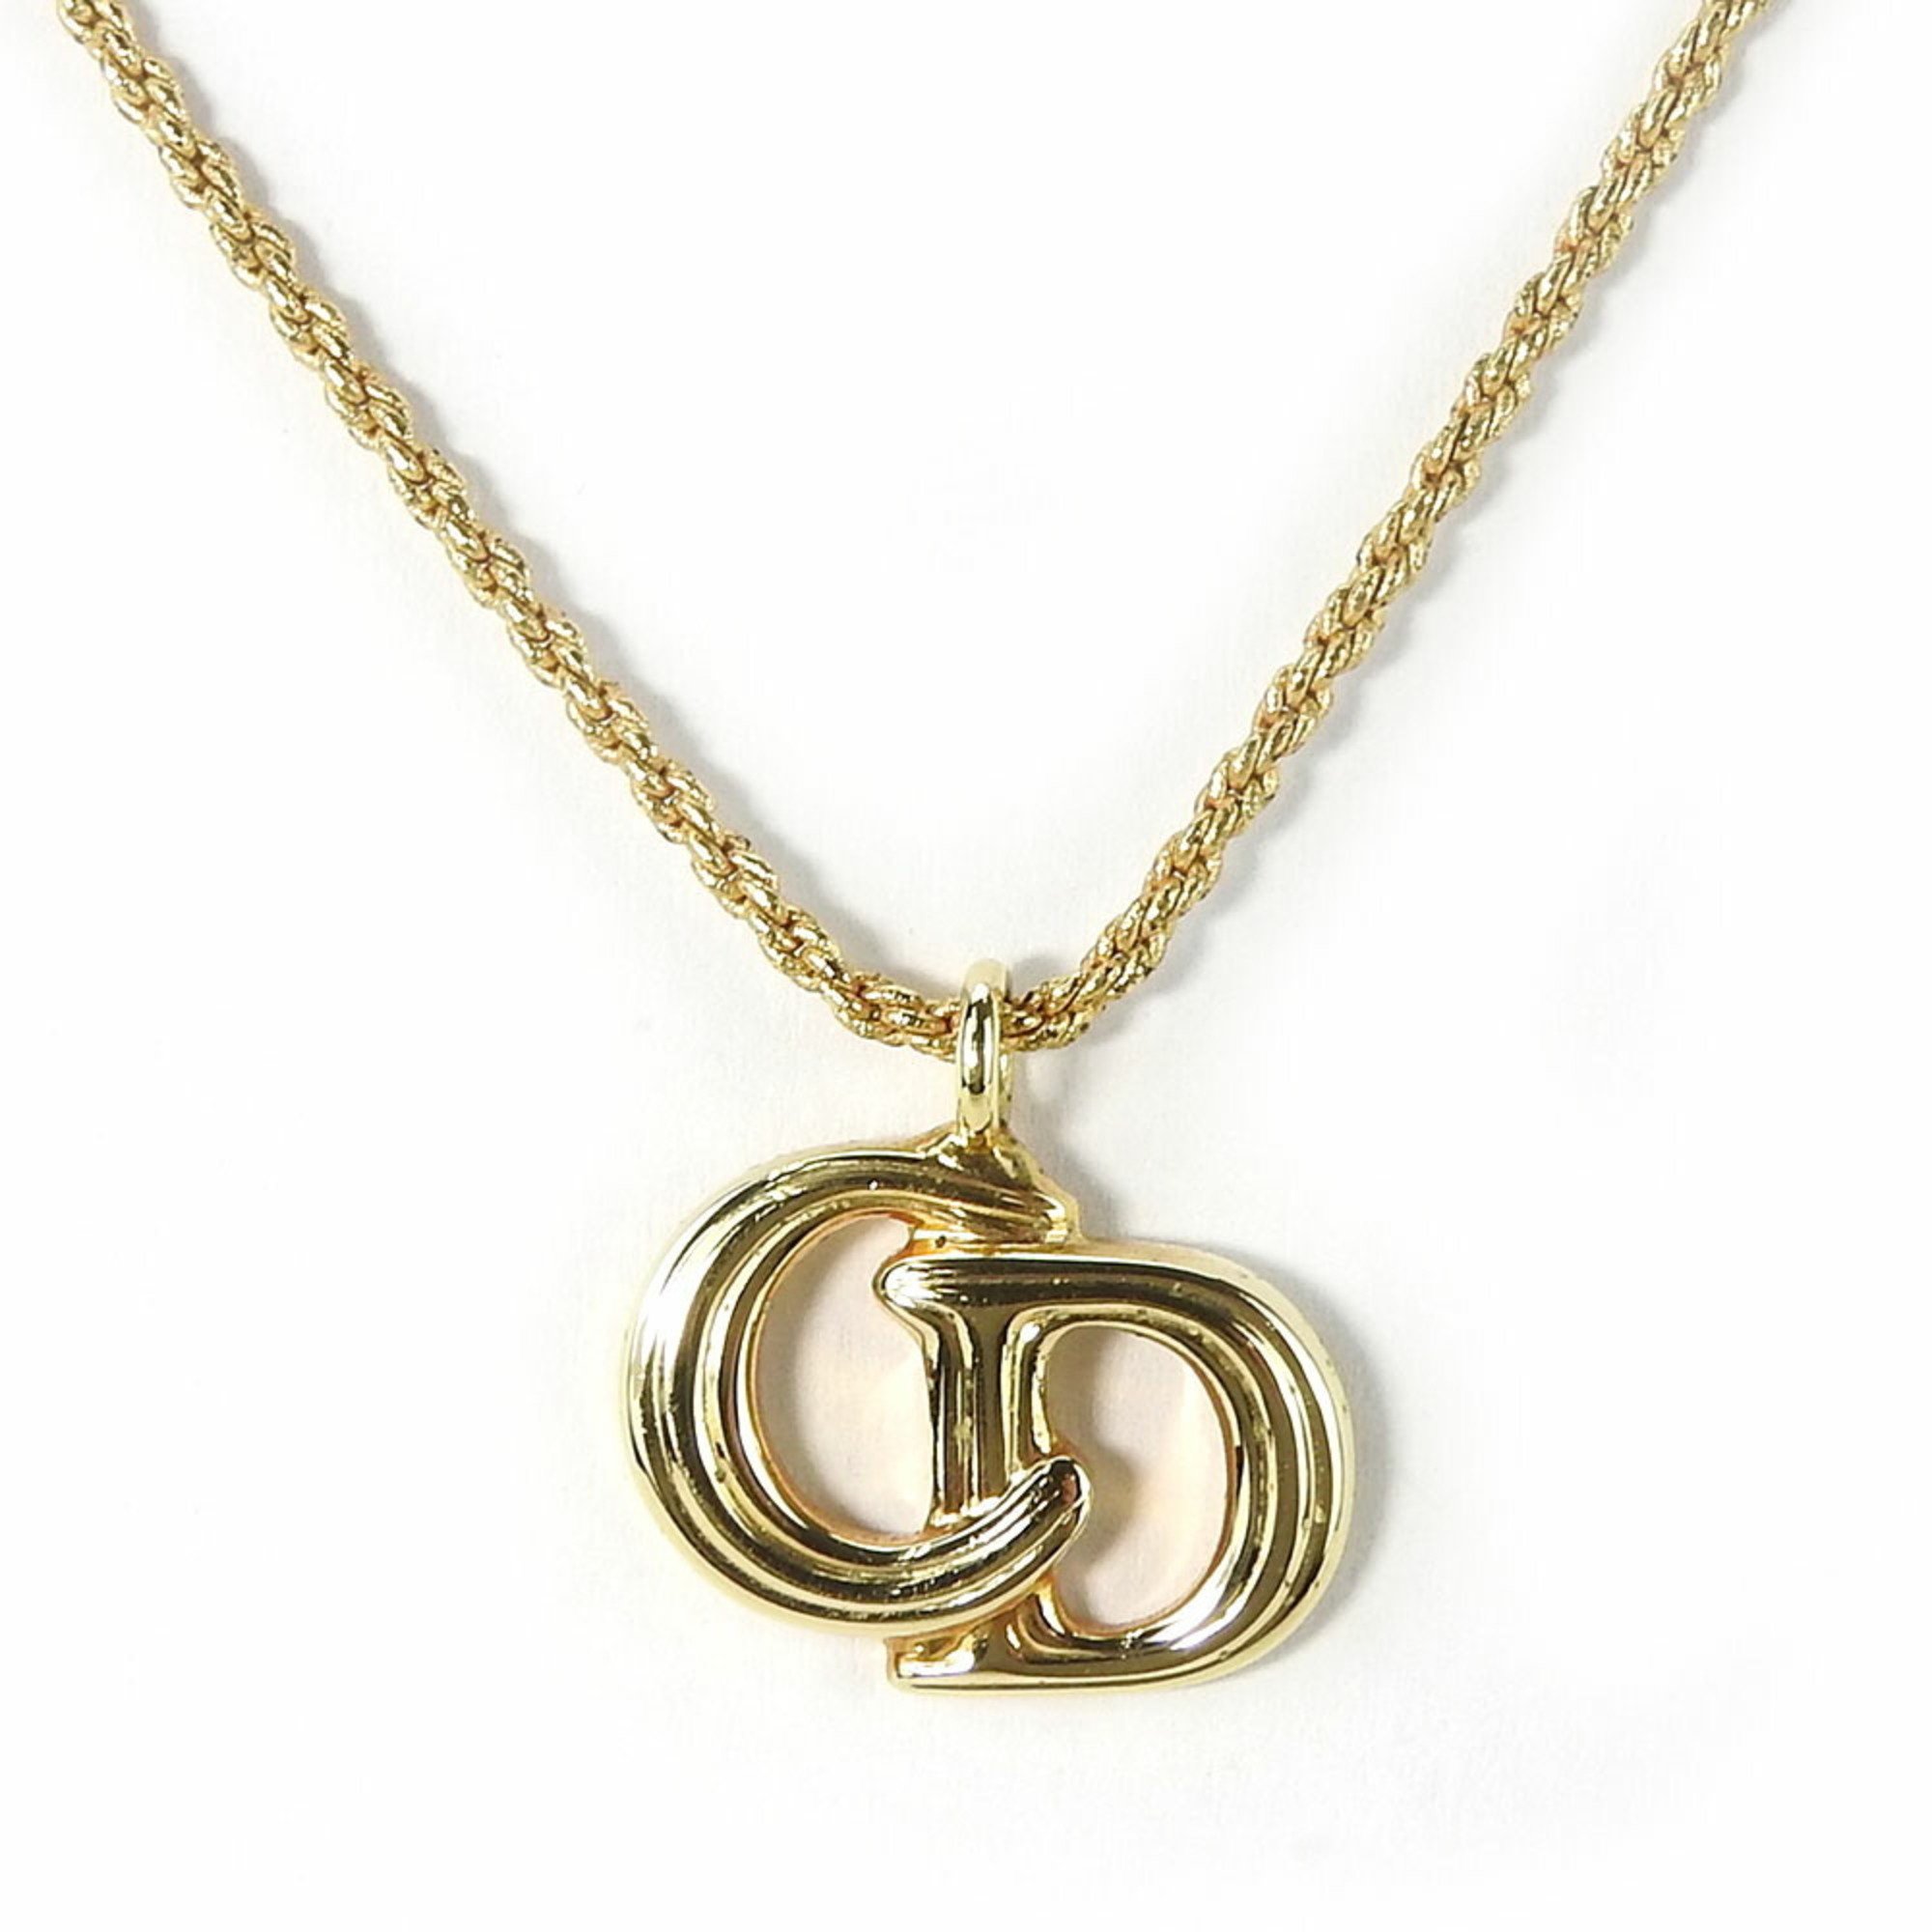 Christian Dior Necklace Metal Gold Plated CD Women's